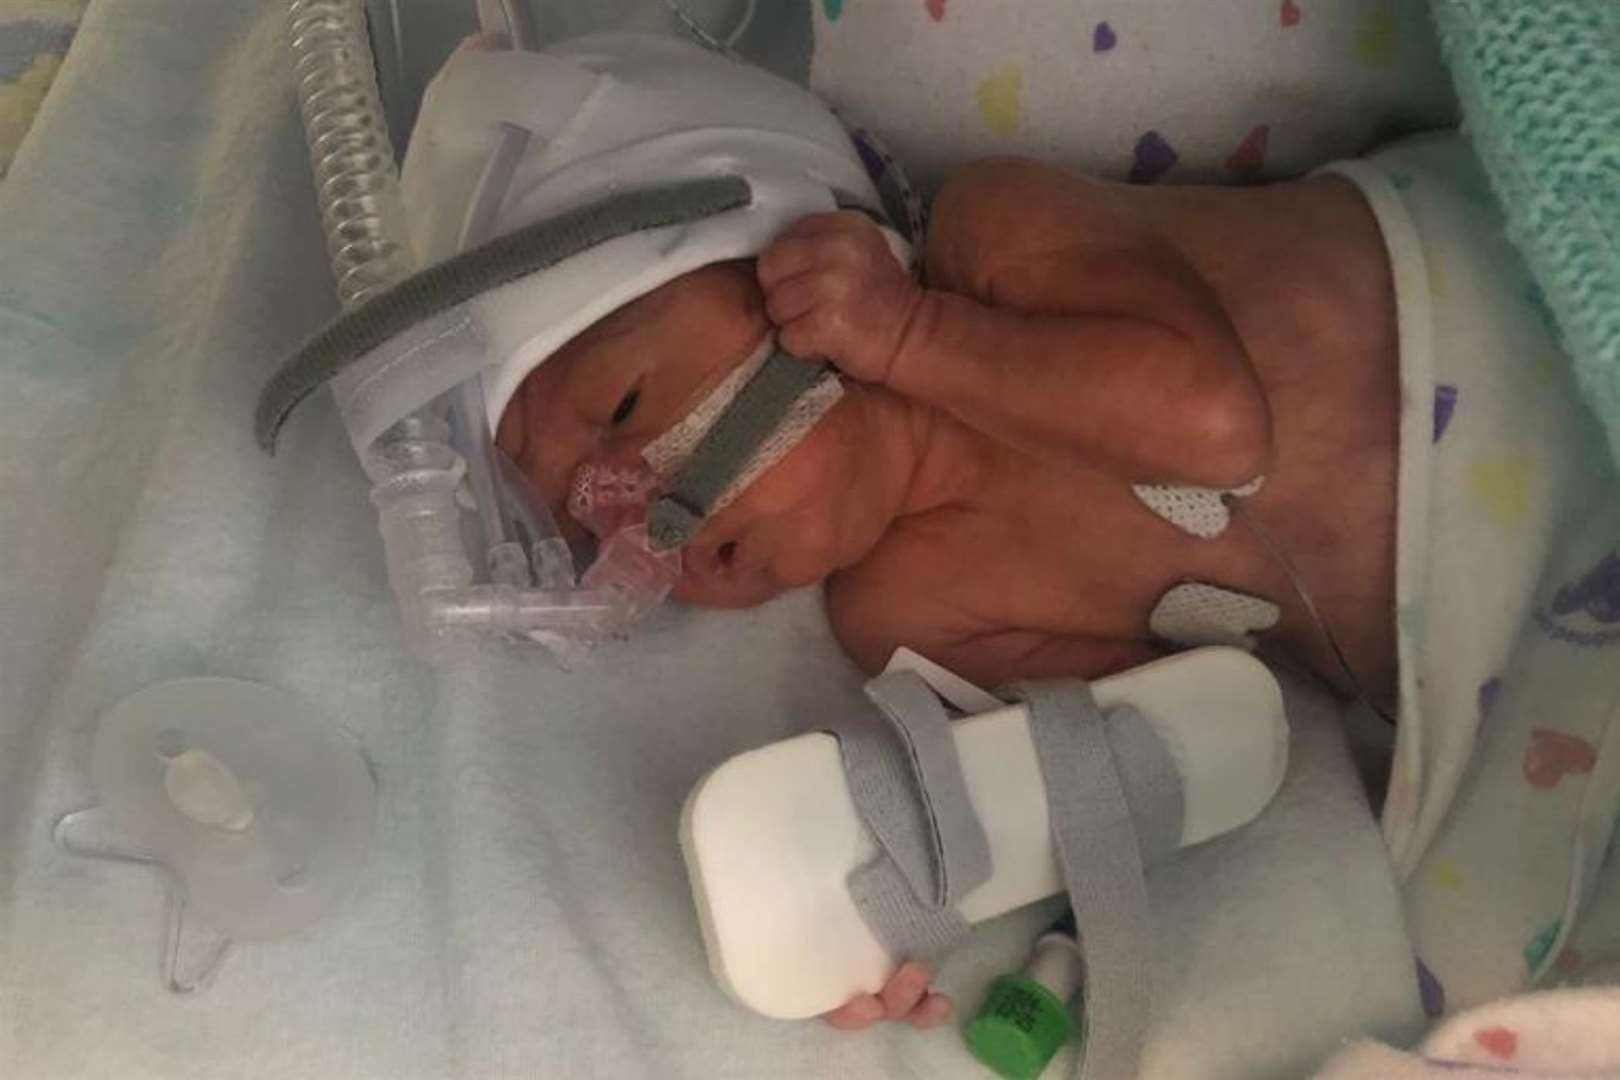 Baby Enzo had to spend 99 days in the NICU